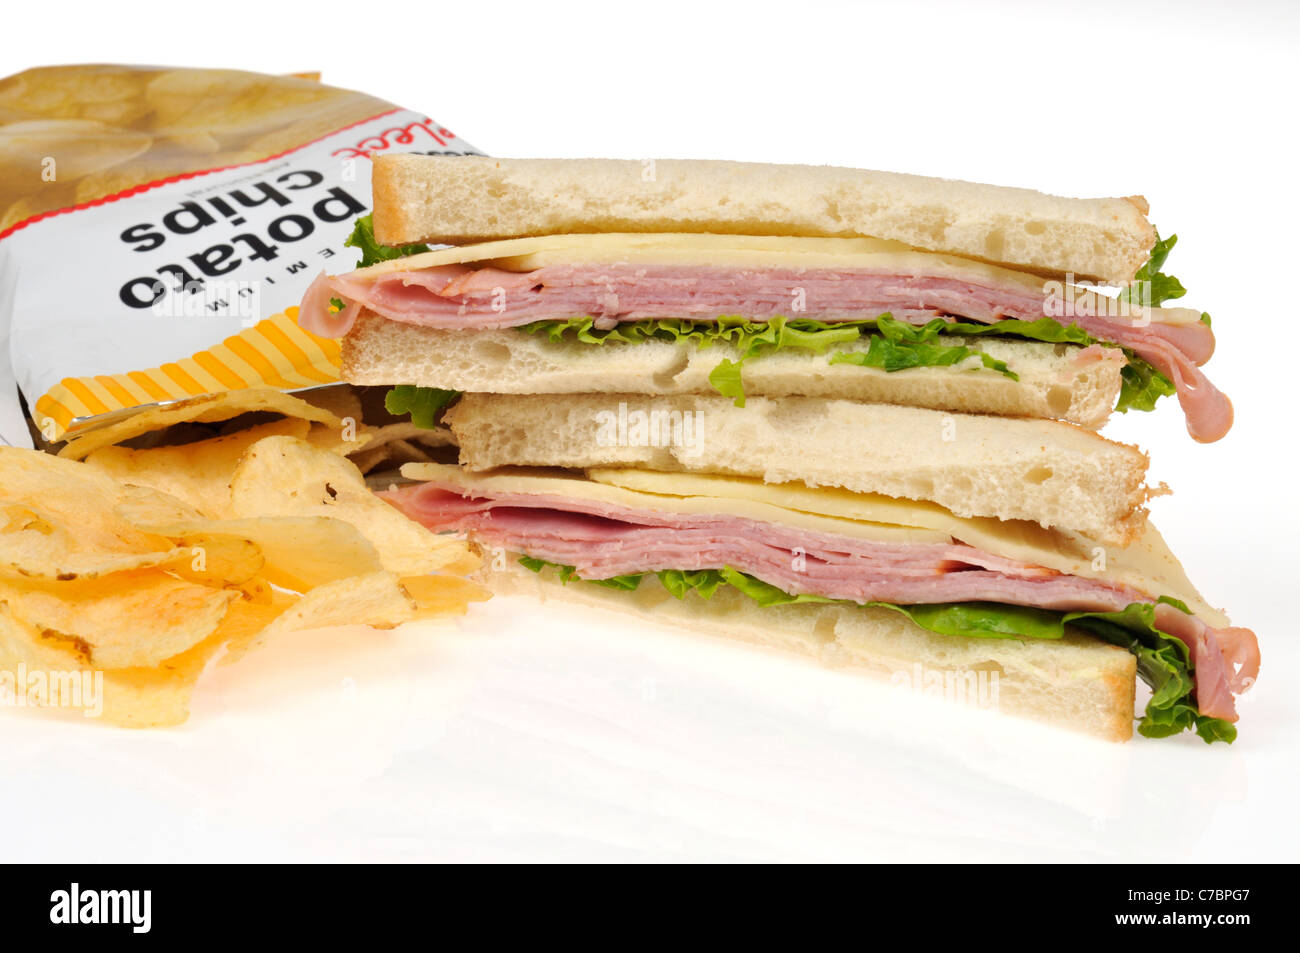 Ham and cheese sandwich with lettuce on white bread and bag of potato chips on white background. Stock Photo